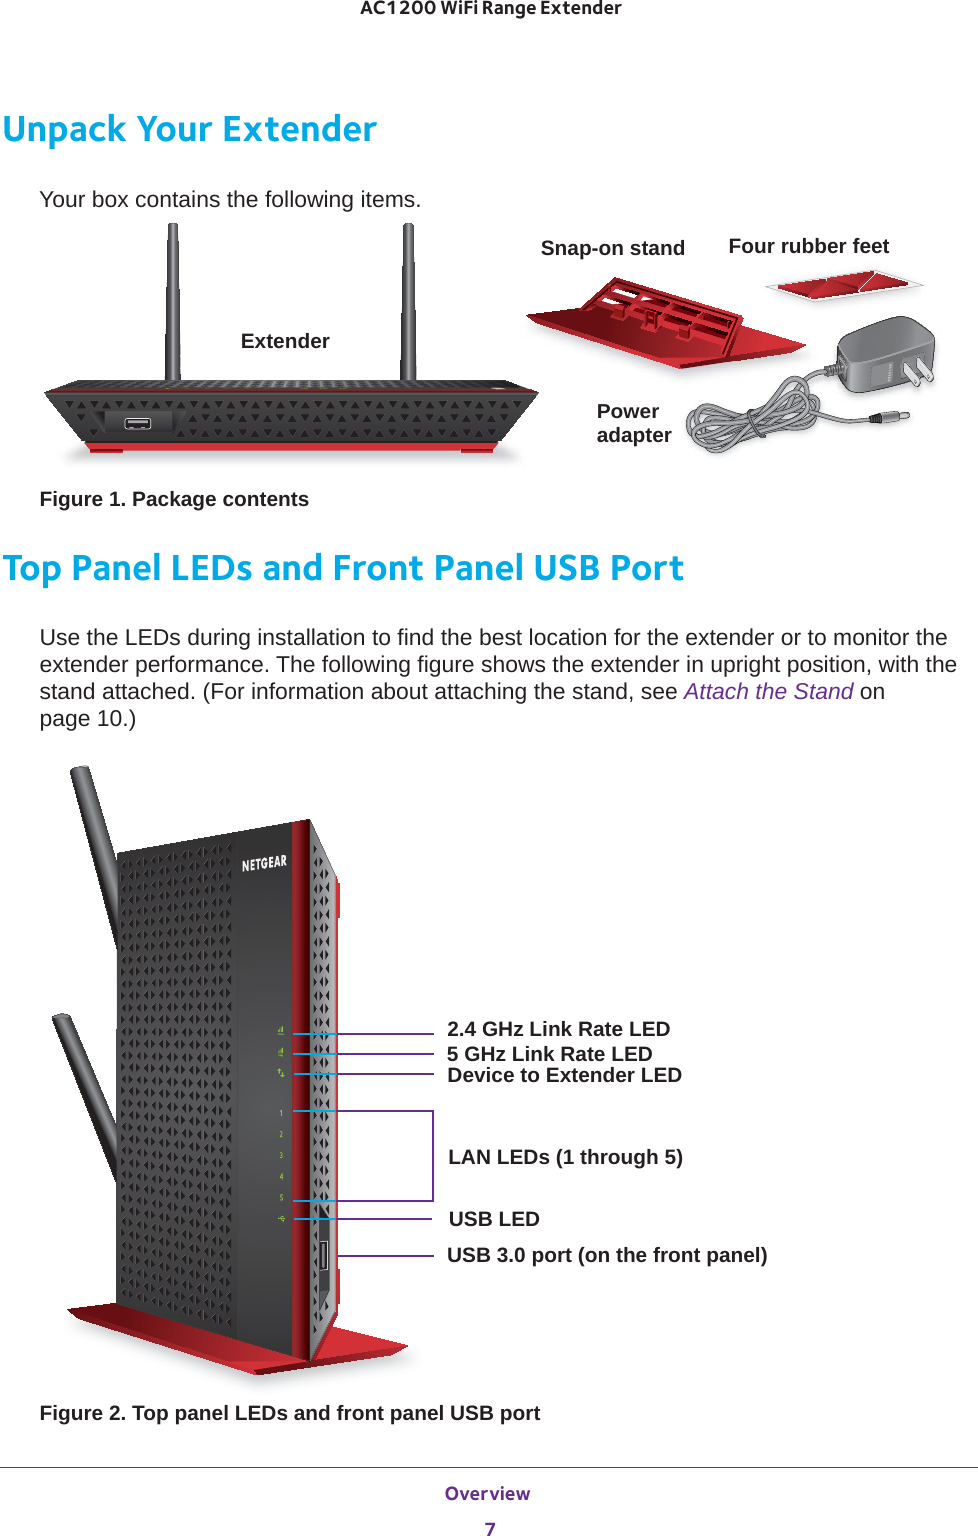 Overview 7 AC1200 WiFi Range ExtenderUnpack Your ExtenderYour box contains the following items.PowerSnap-on stand Four rubber feetExtenderadapterFigure 1. Package contentsTop Panel LEDs and Front Panel USB PortUse the LEDs during installation to find the best location for the extender or to monitor the extender performance. The following figure shows the extender in upright position, with the stand attached. (For information about attaching the stand, see Attach the Stand on page  10.)2.4 GHz Link Rate LED5 GHz Link Rate LEDDevice to Extender LEDLAN LEDs (1 through 5)USB LEDUSB 3.0 port (on the front panel)Figure 2. Top panel LEDs and front panel USB port